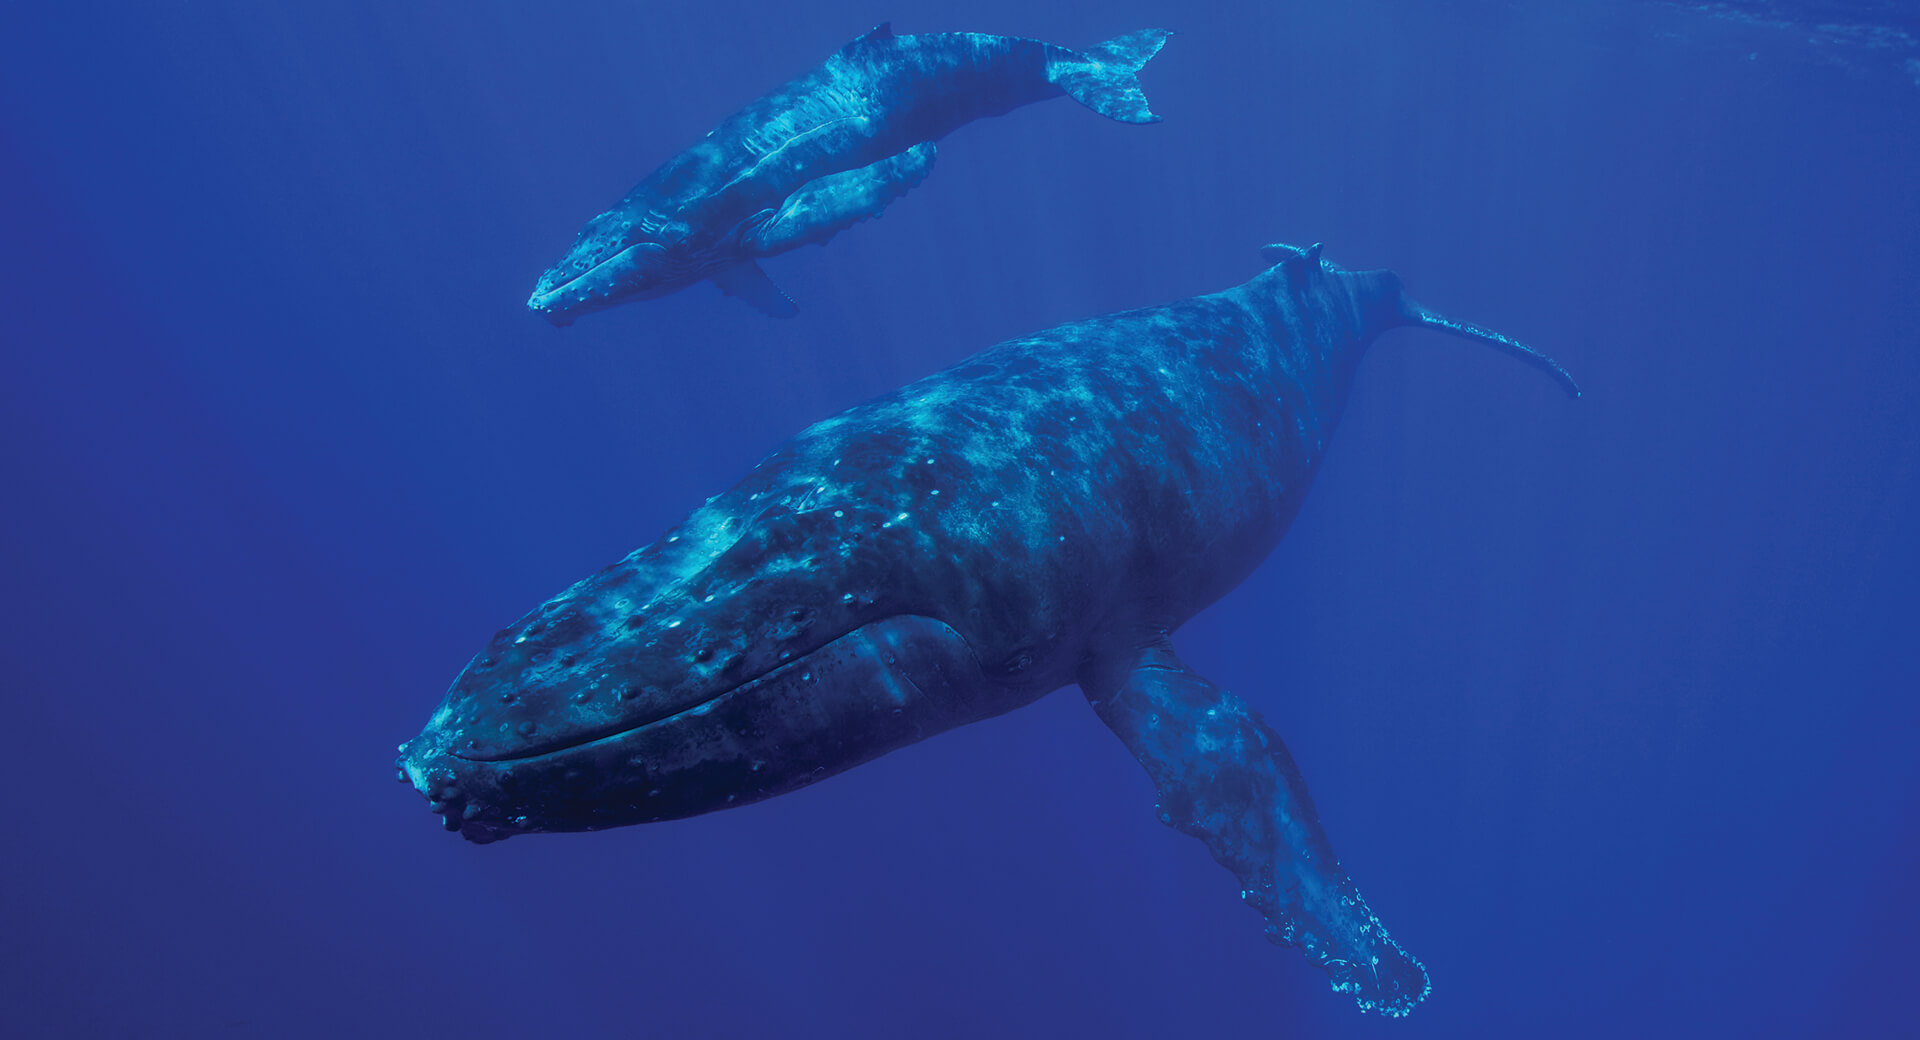 A humpback whale mother and calf